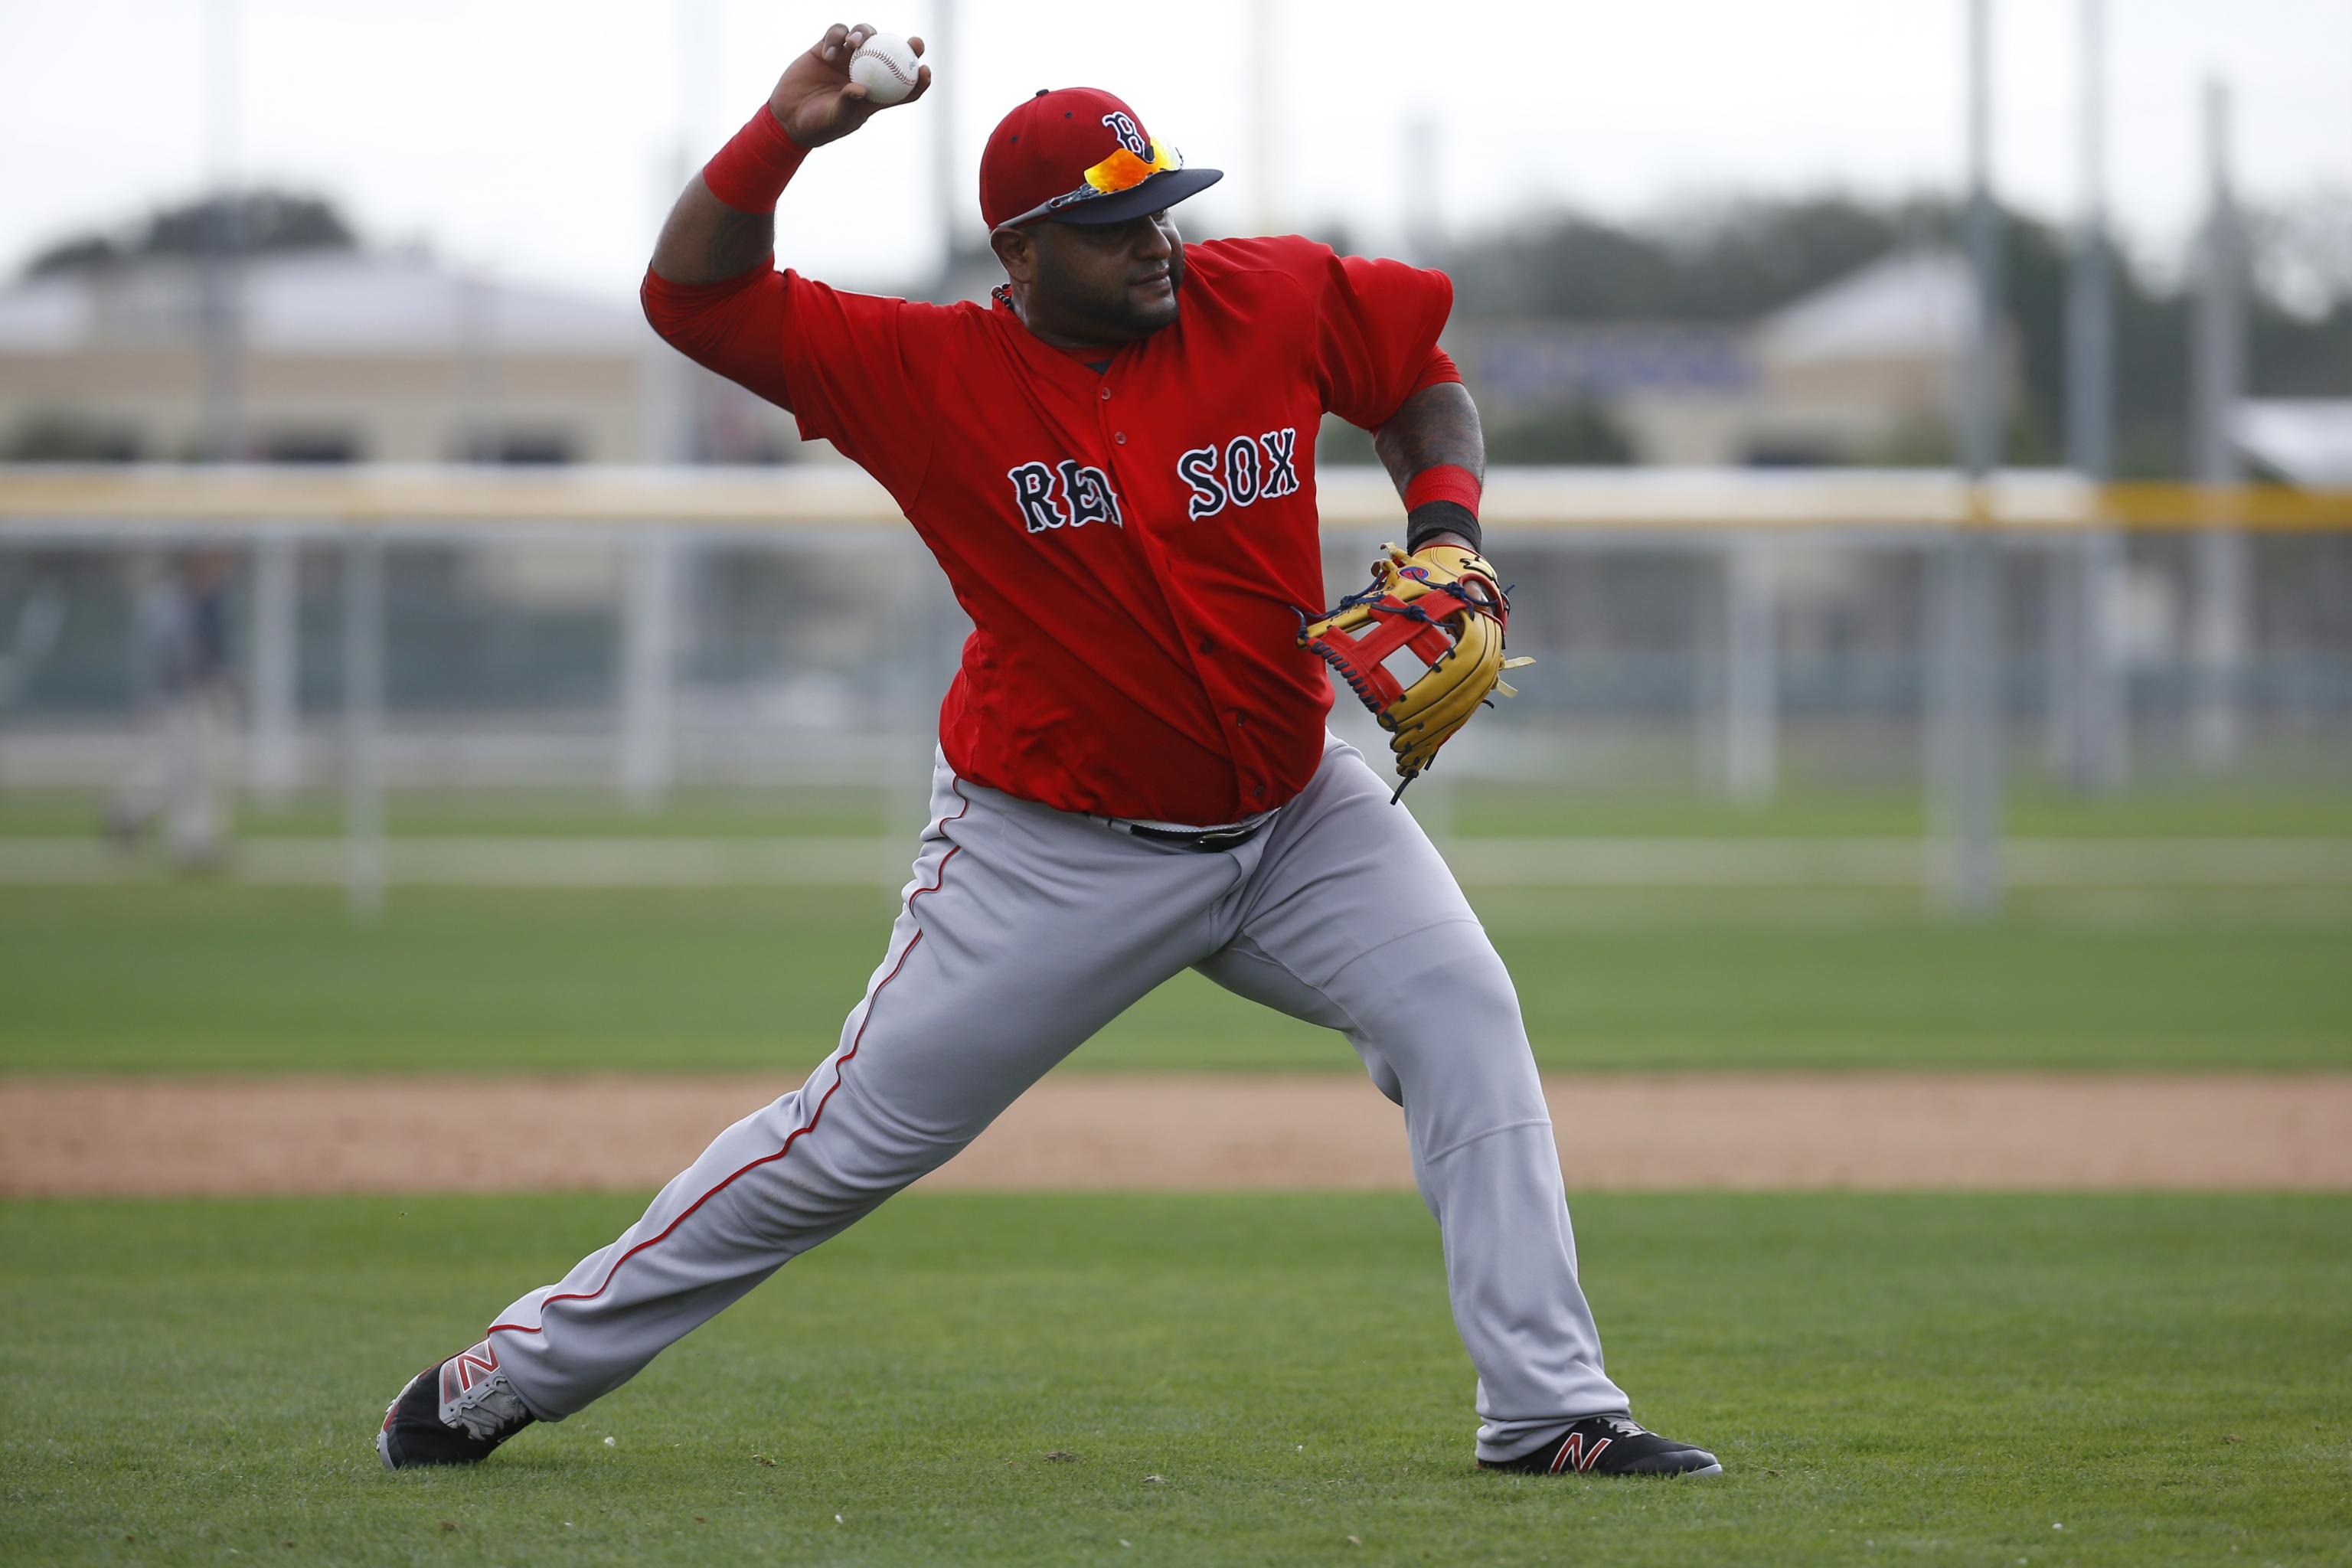 You won't believe what baseball player Pablo Sandoval looks like now